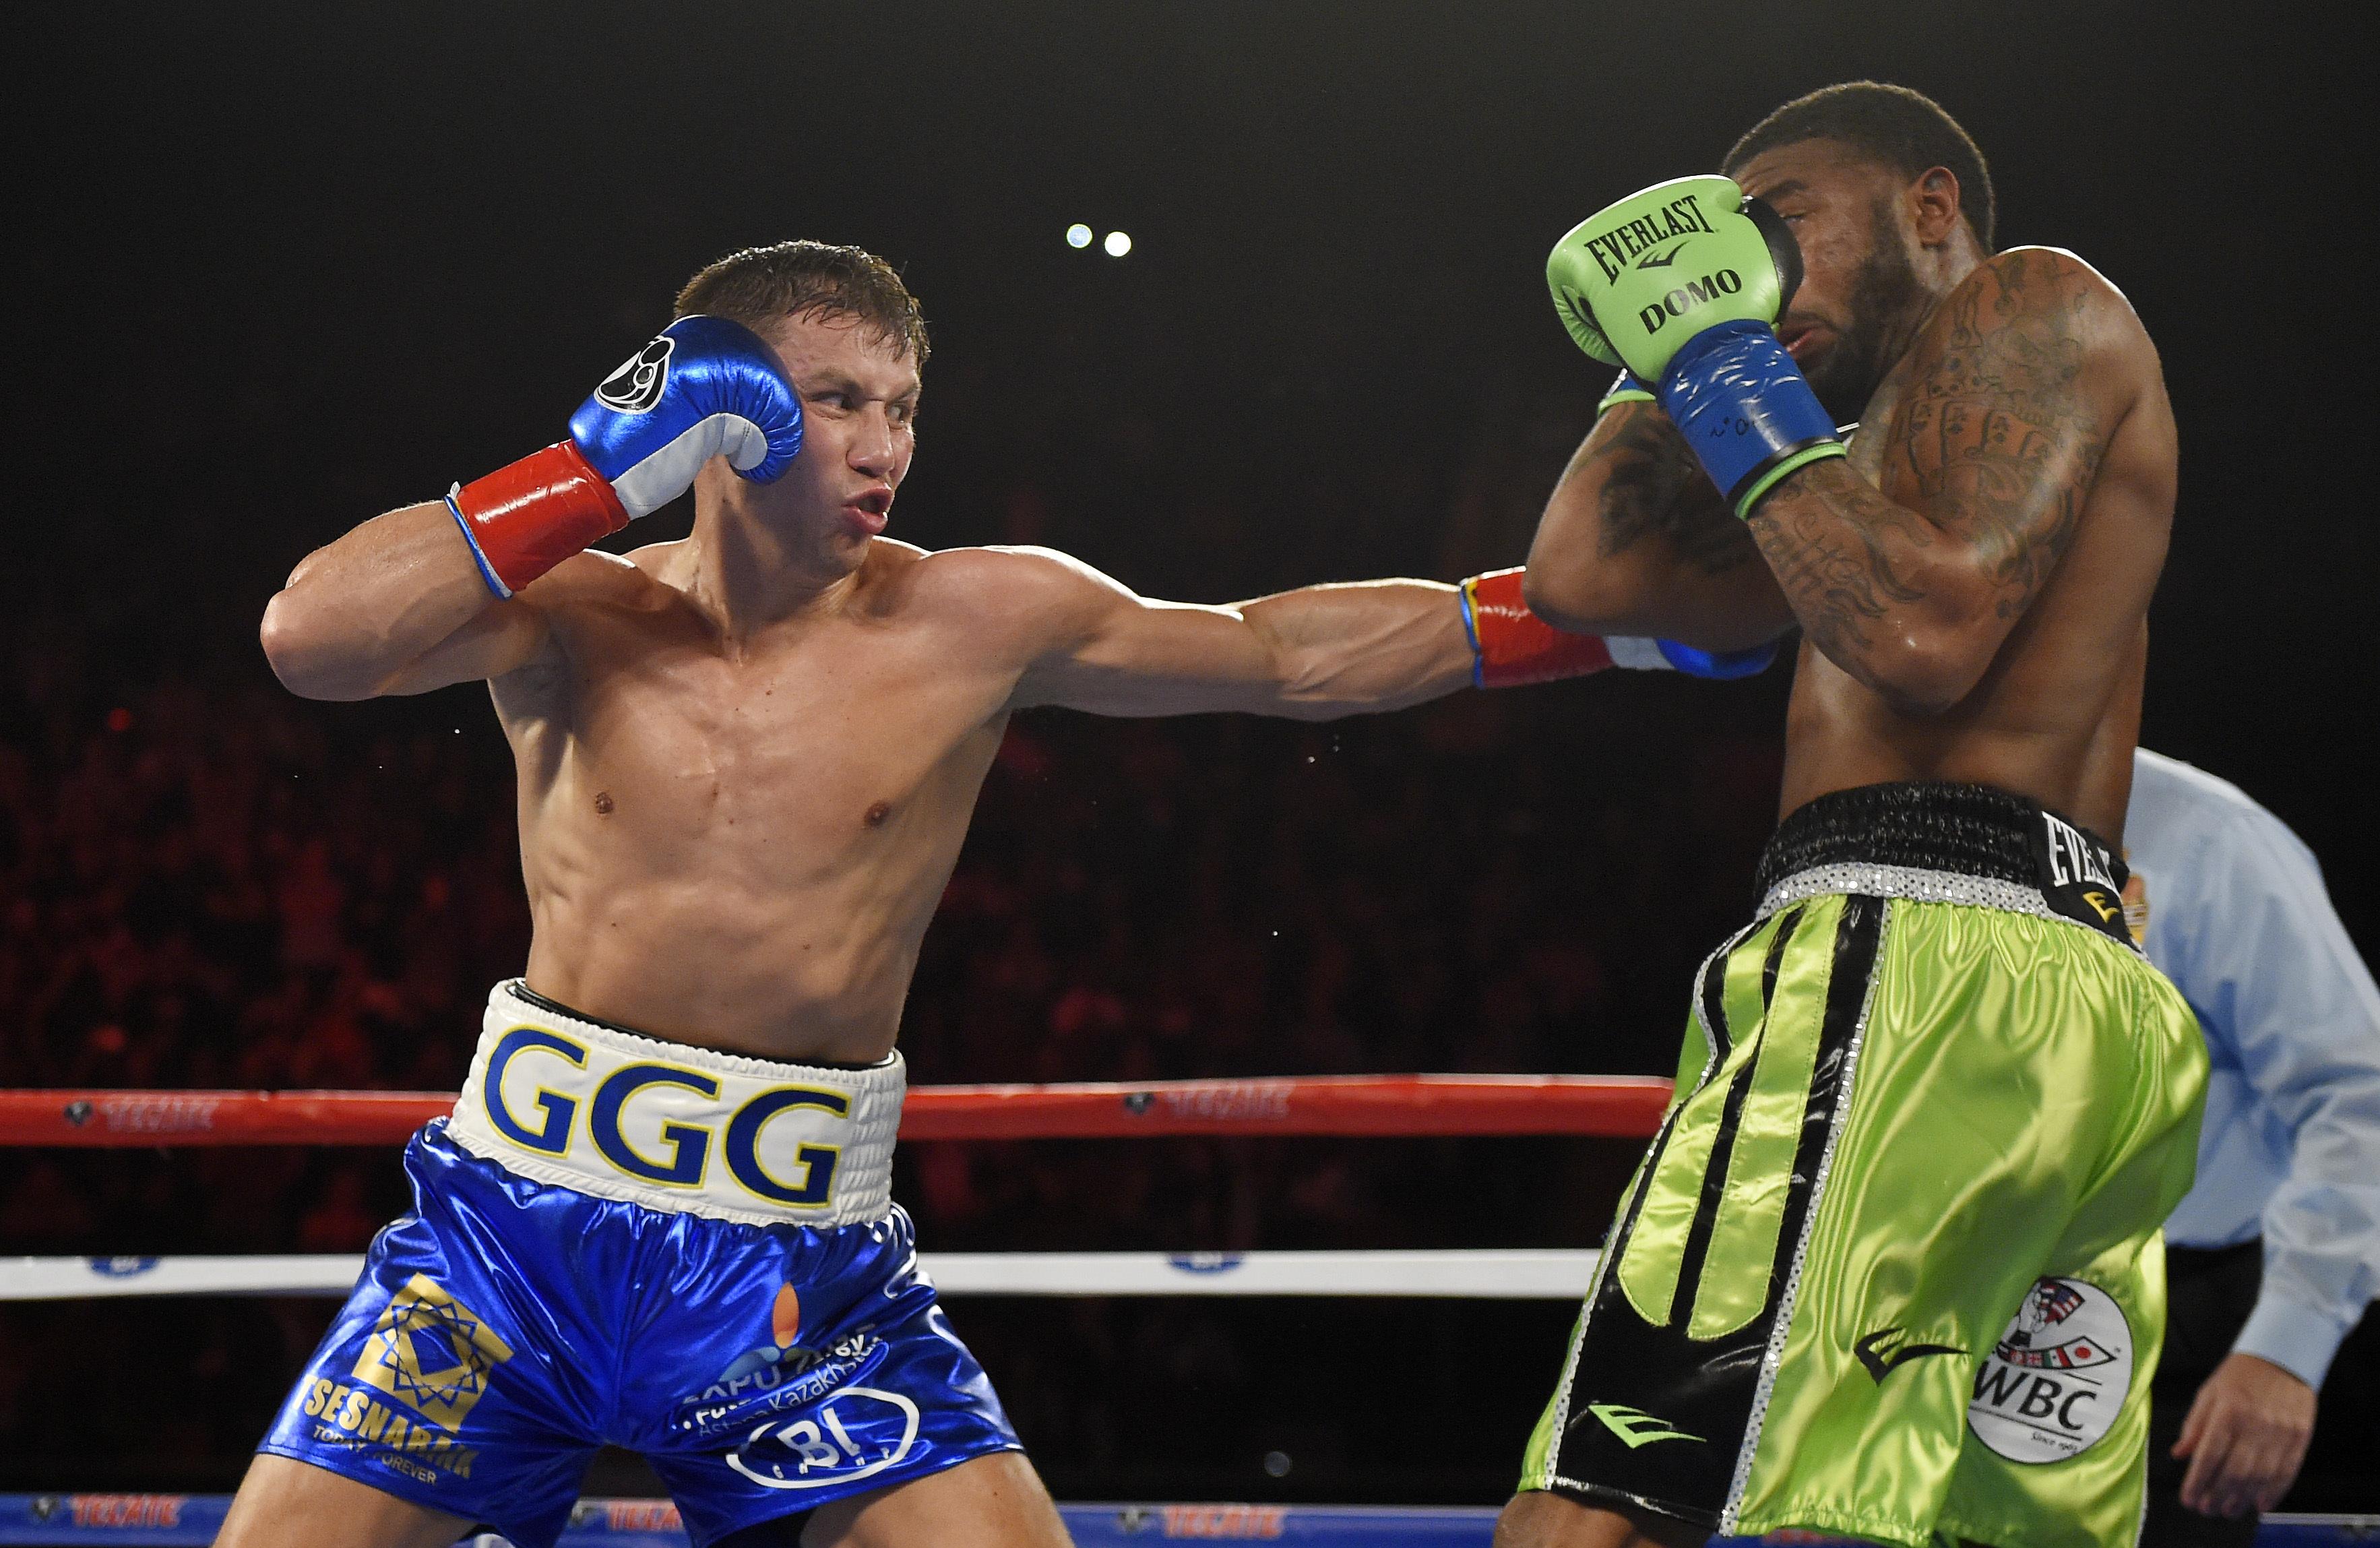 After latest knockout, Gennady Golovkin renews his chase of Canelo